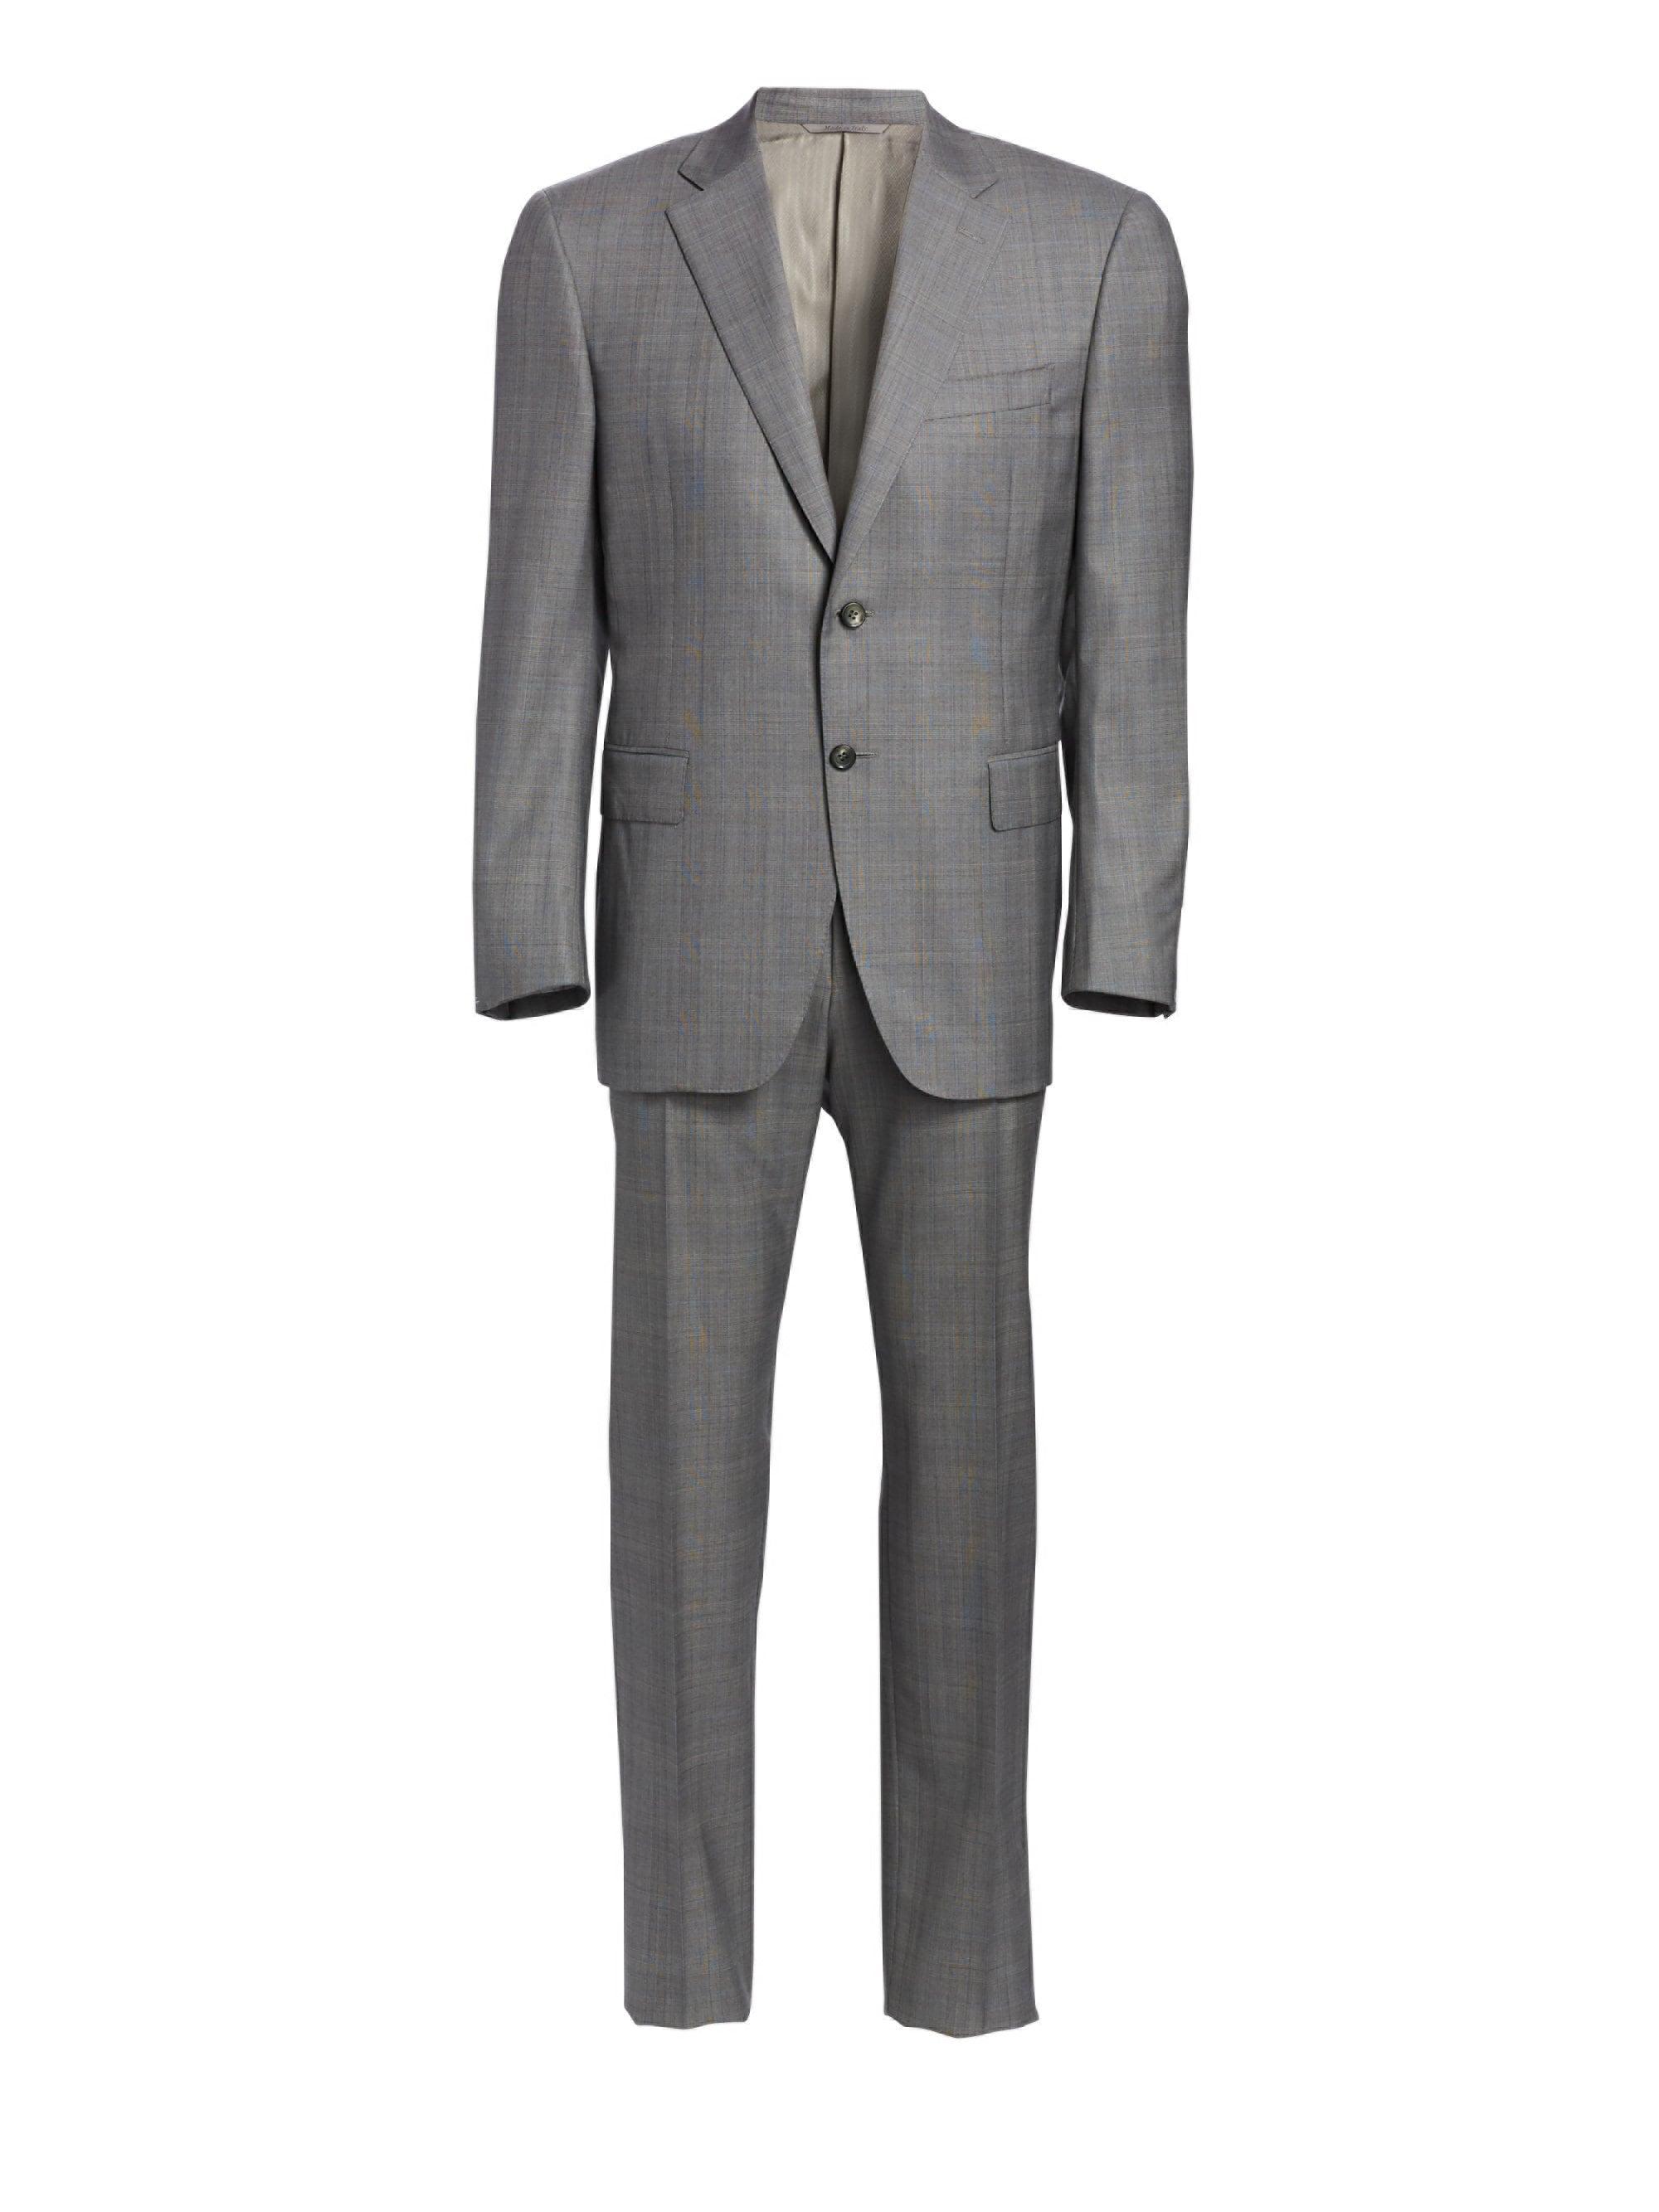 Canali Glen Plaid Wool Suit in Gray for Men - Lyst